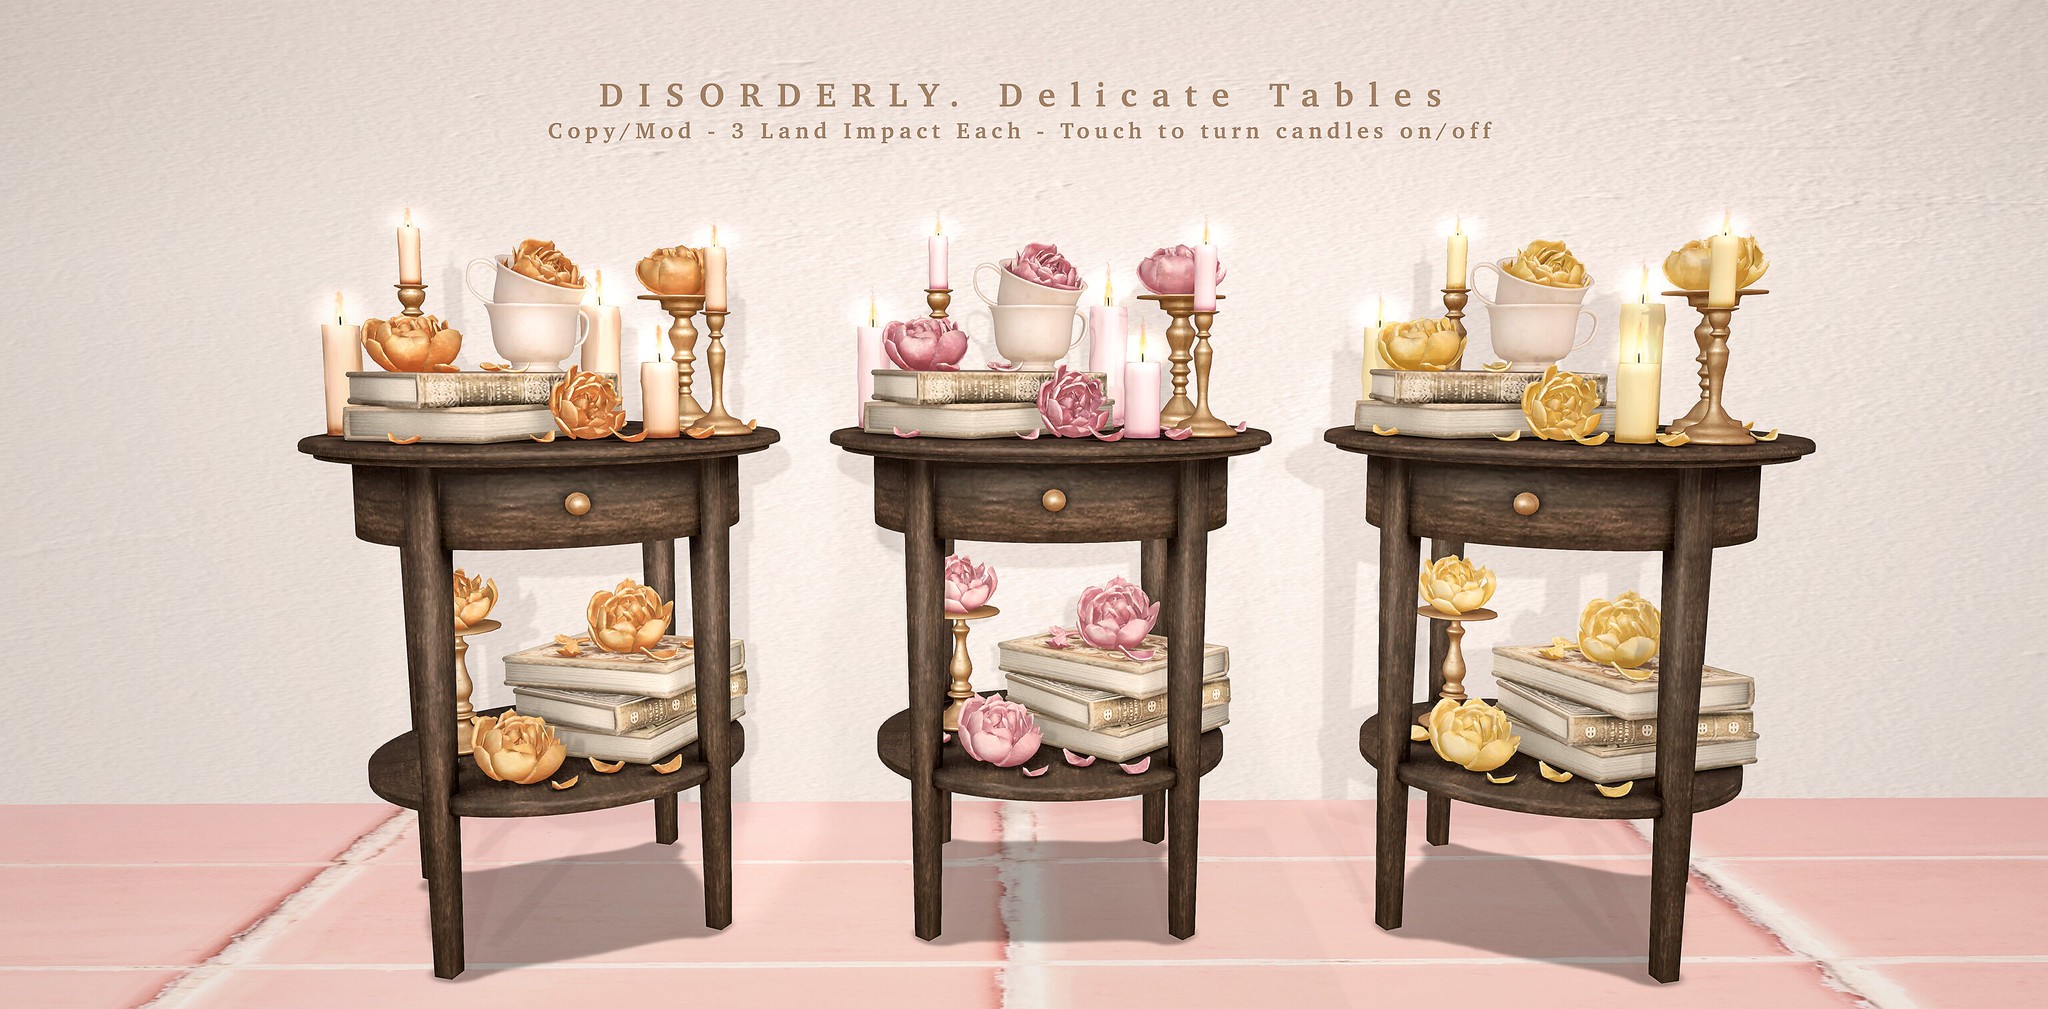 Disorderly – Delicate Tables